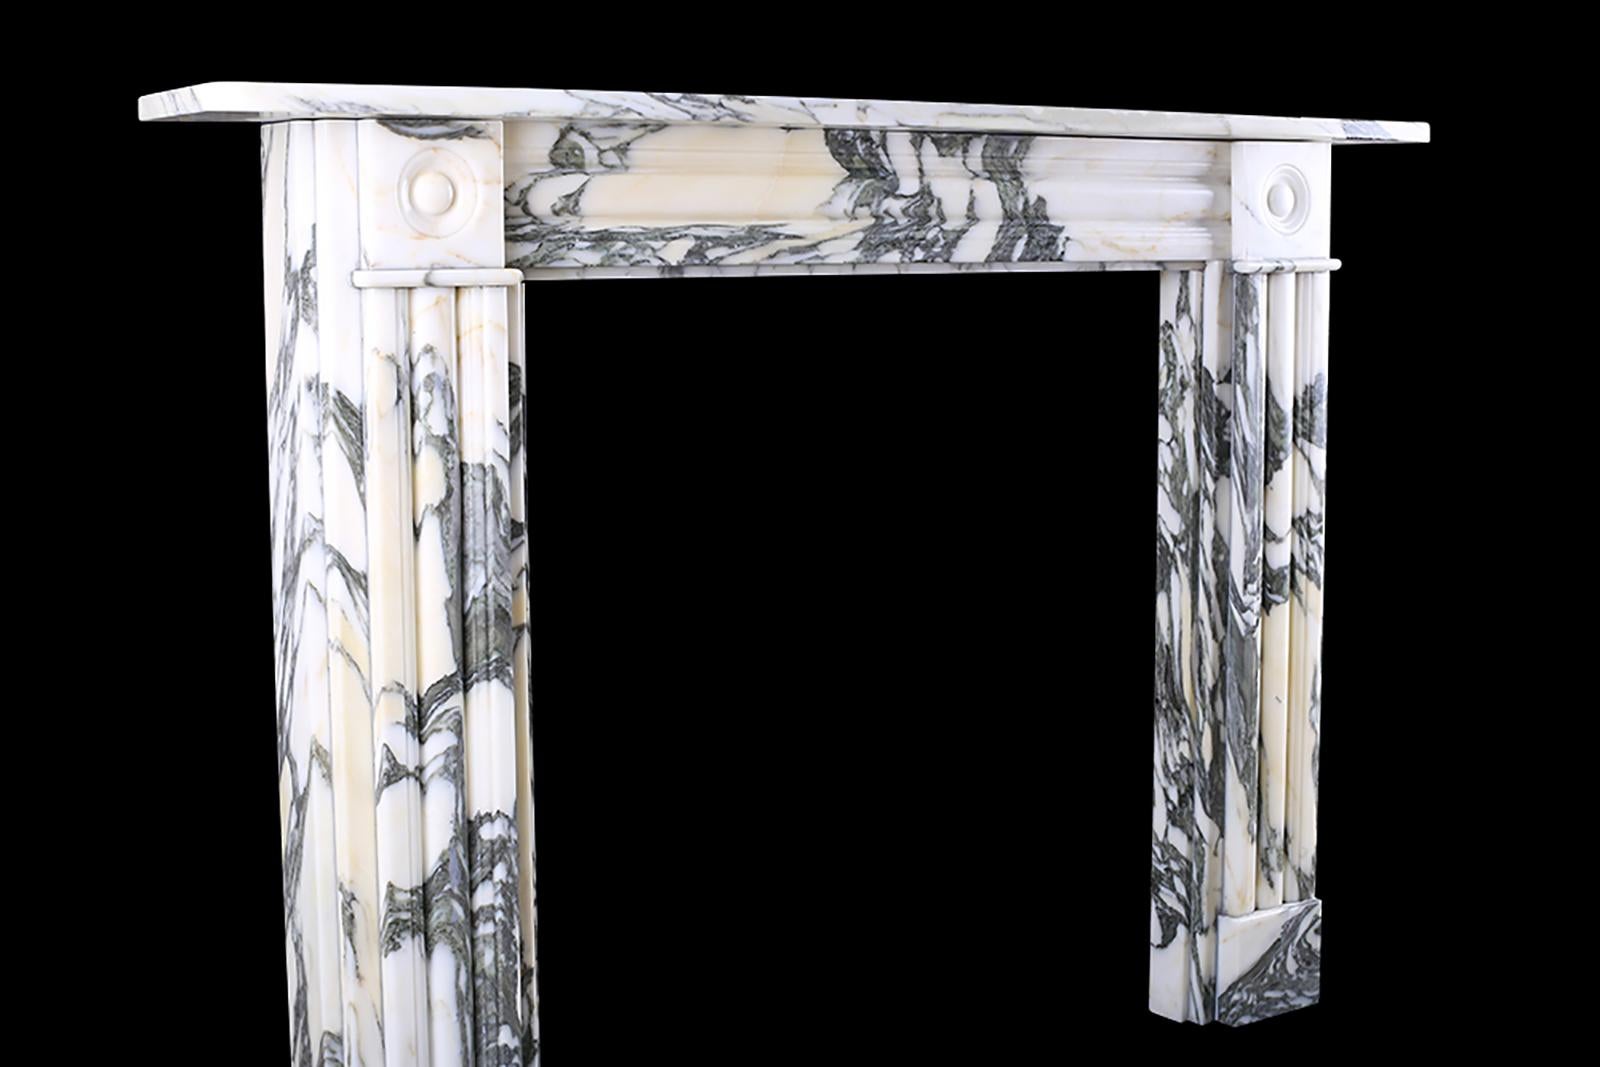 Large double-slip Georgian style fireplace Surround in finest quality Italian Arabescato Marble.

Measures: Depth: 8” – 20.3 cm
External Height: 42 3/4” – 108.5 cm
External Width: 60” – 152 cm
Internal Height: 36” – 91.5 cm
Internal Width: 36”